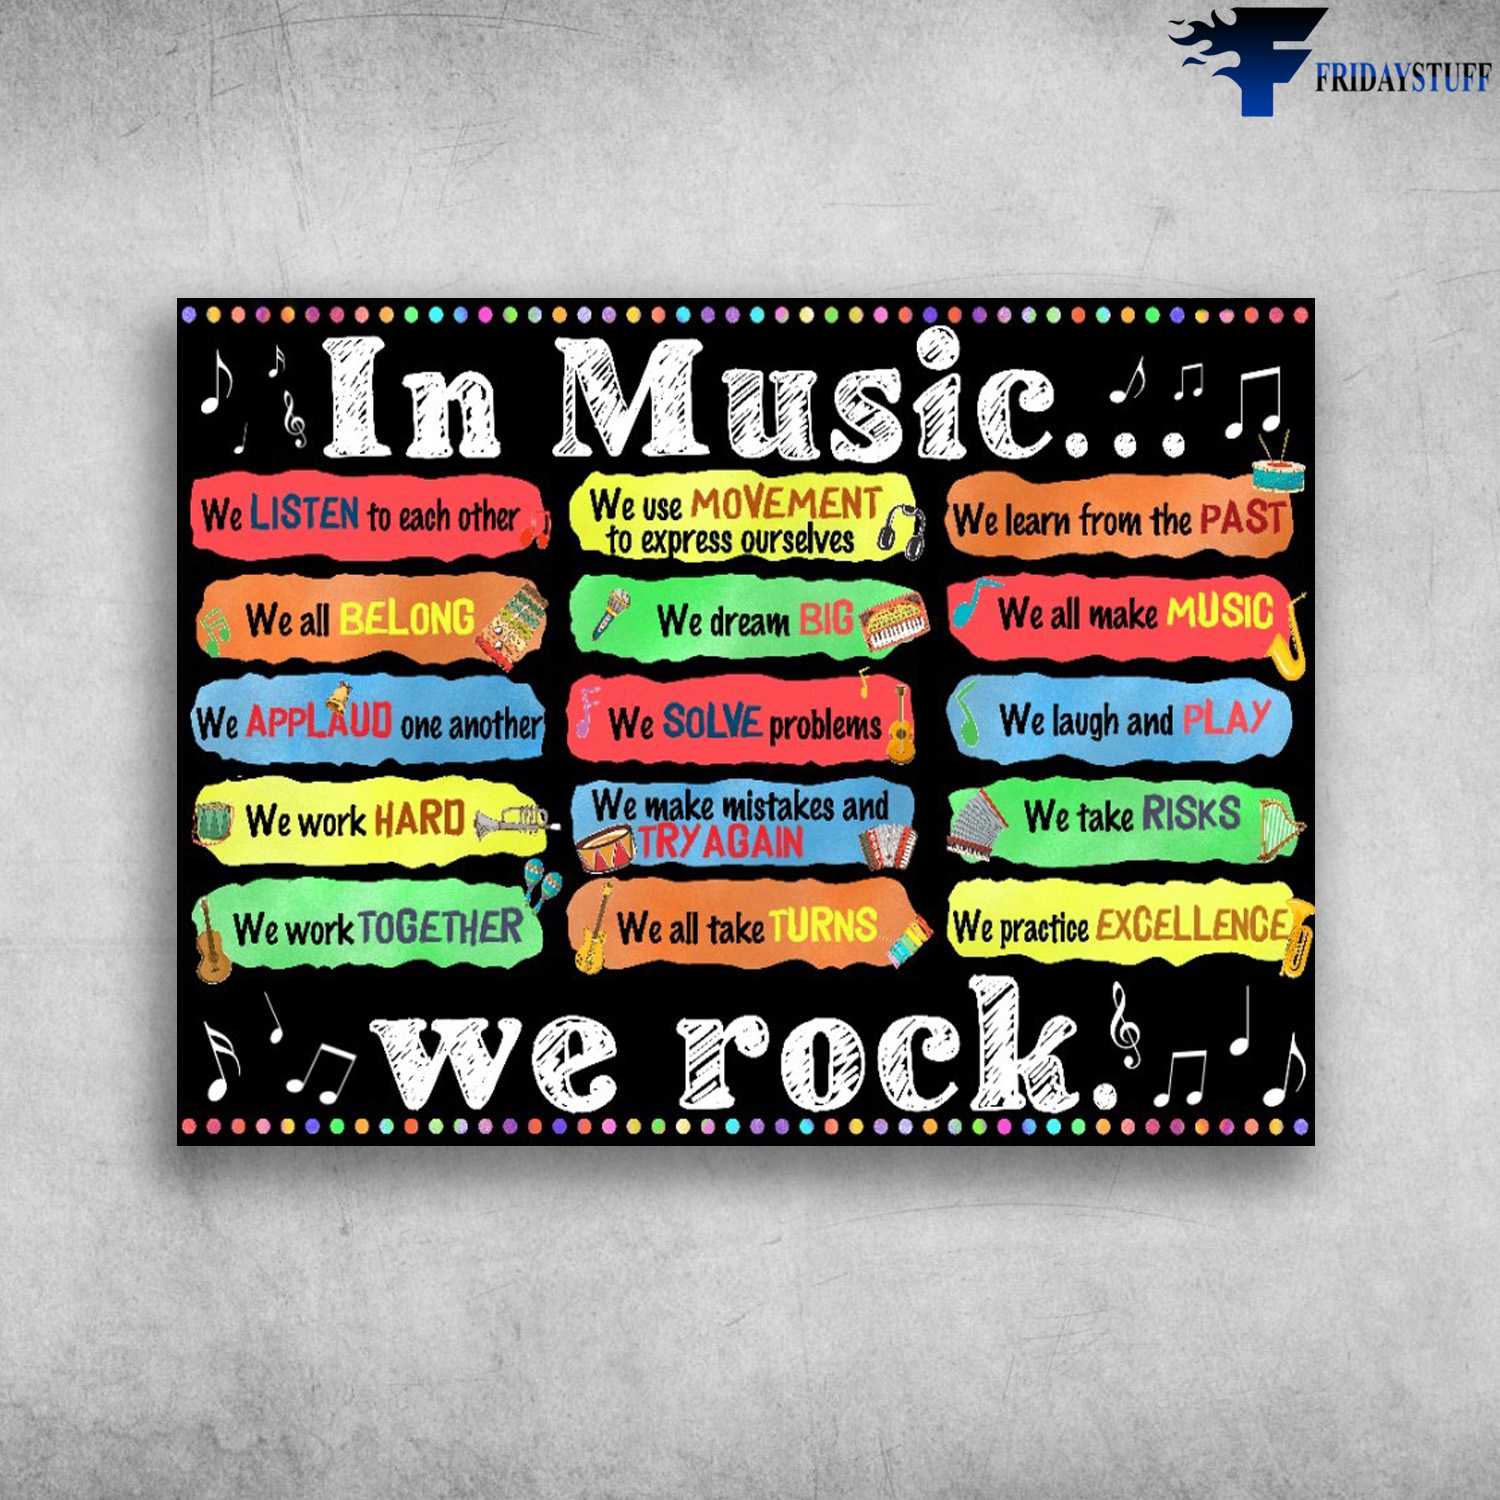 Music Class - In Music We Listen To Each Other, We All Belong, We Applaud One Another, We Work Hard, We Work Together, We Rock